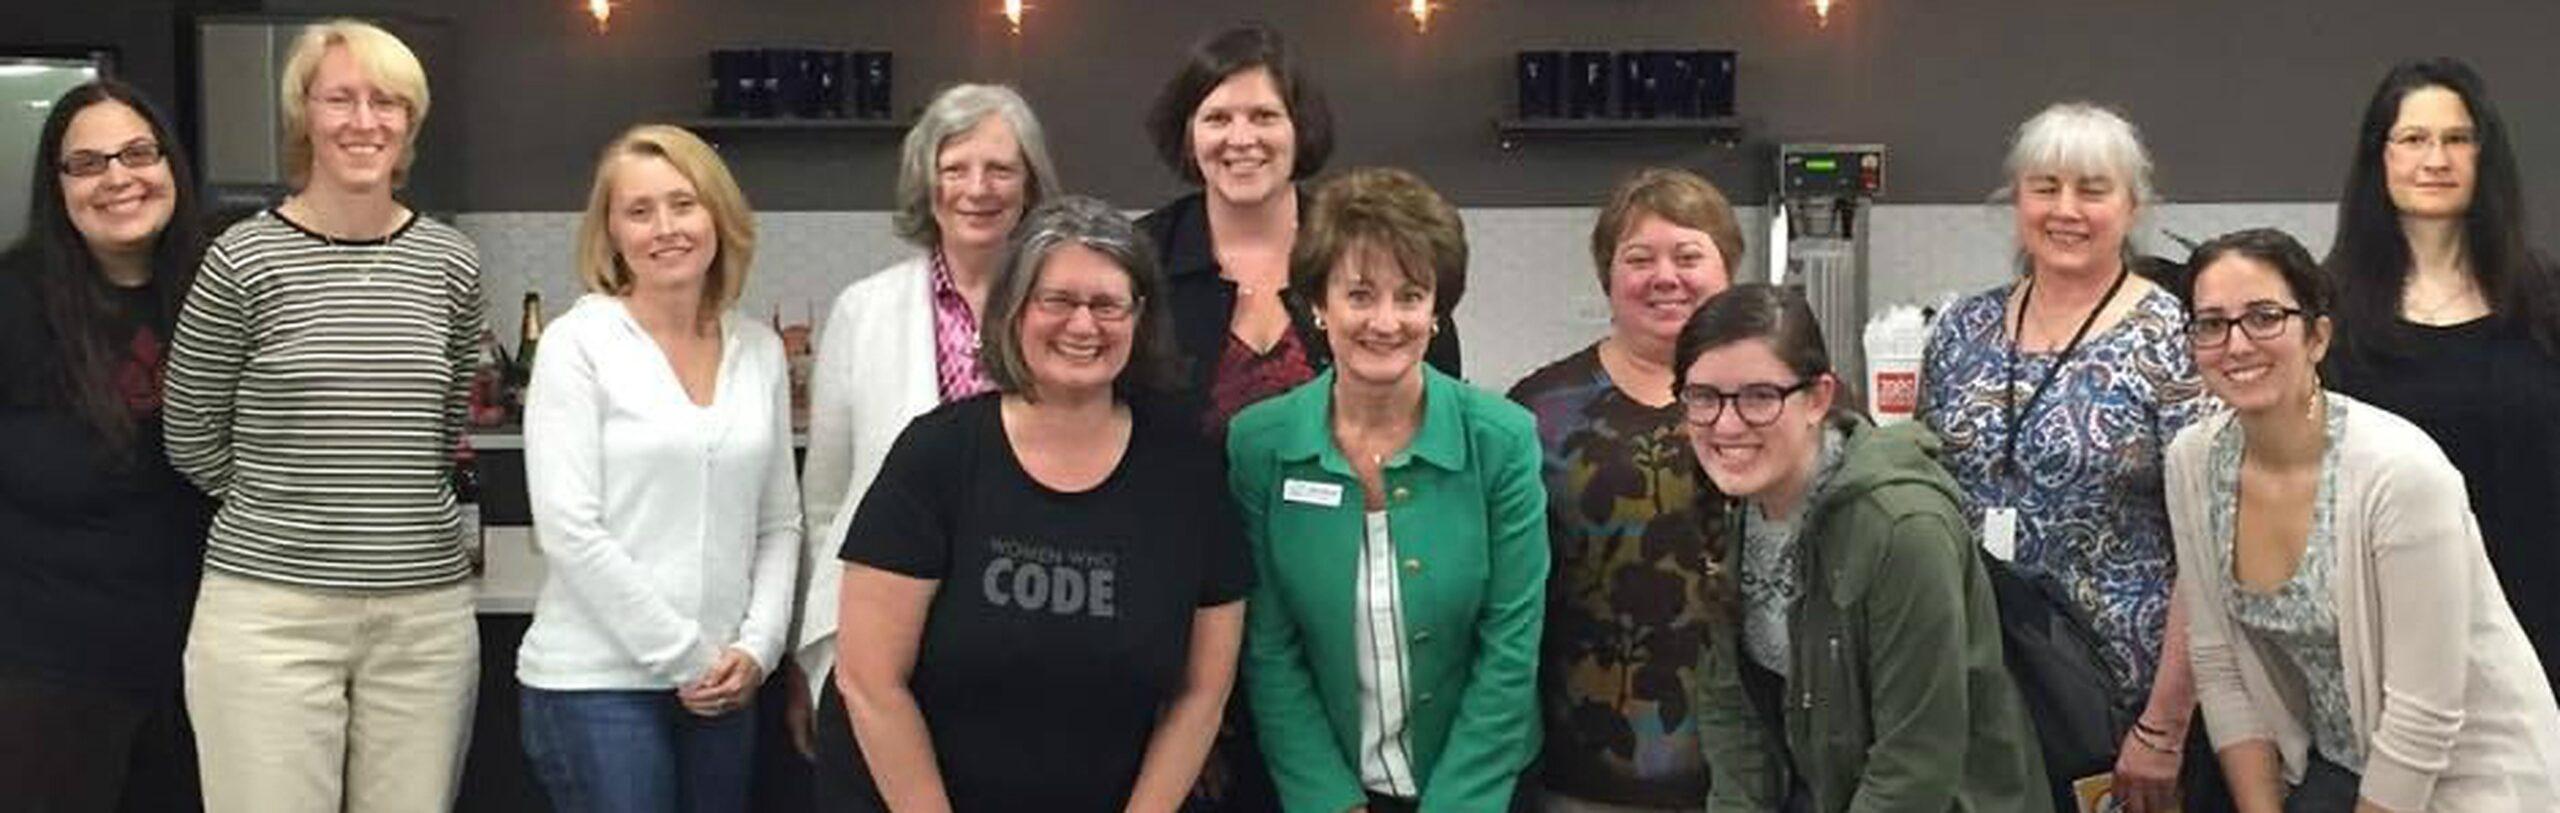 Featured image for Women Who Code Greenville Celebrates Third Anniversary and Ada Lovelace Day